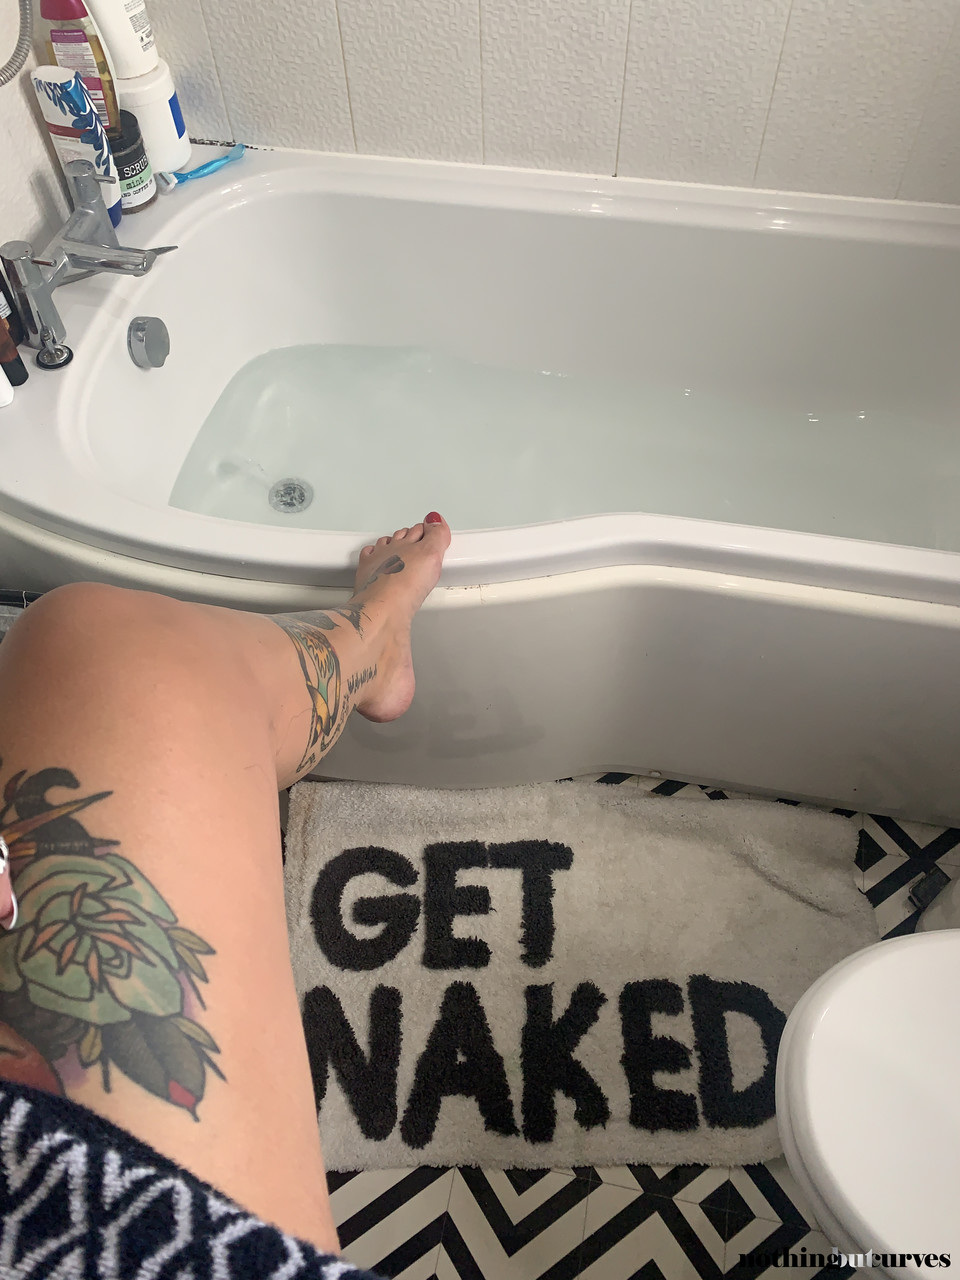 Inked fatty Cherrie Pie flaunts her big breasts while having a bath foto porno #424173946 | Nothing But Curves Pics, Cherrie Pie, Tattoo, porno móvil